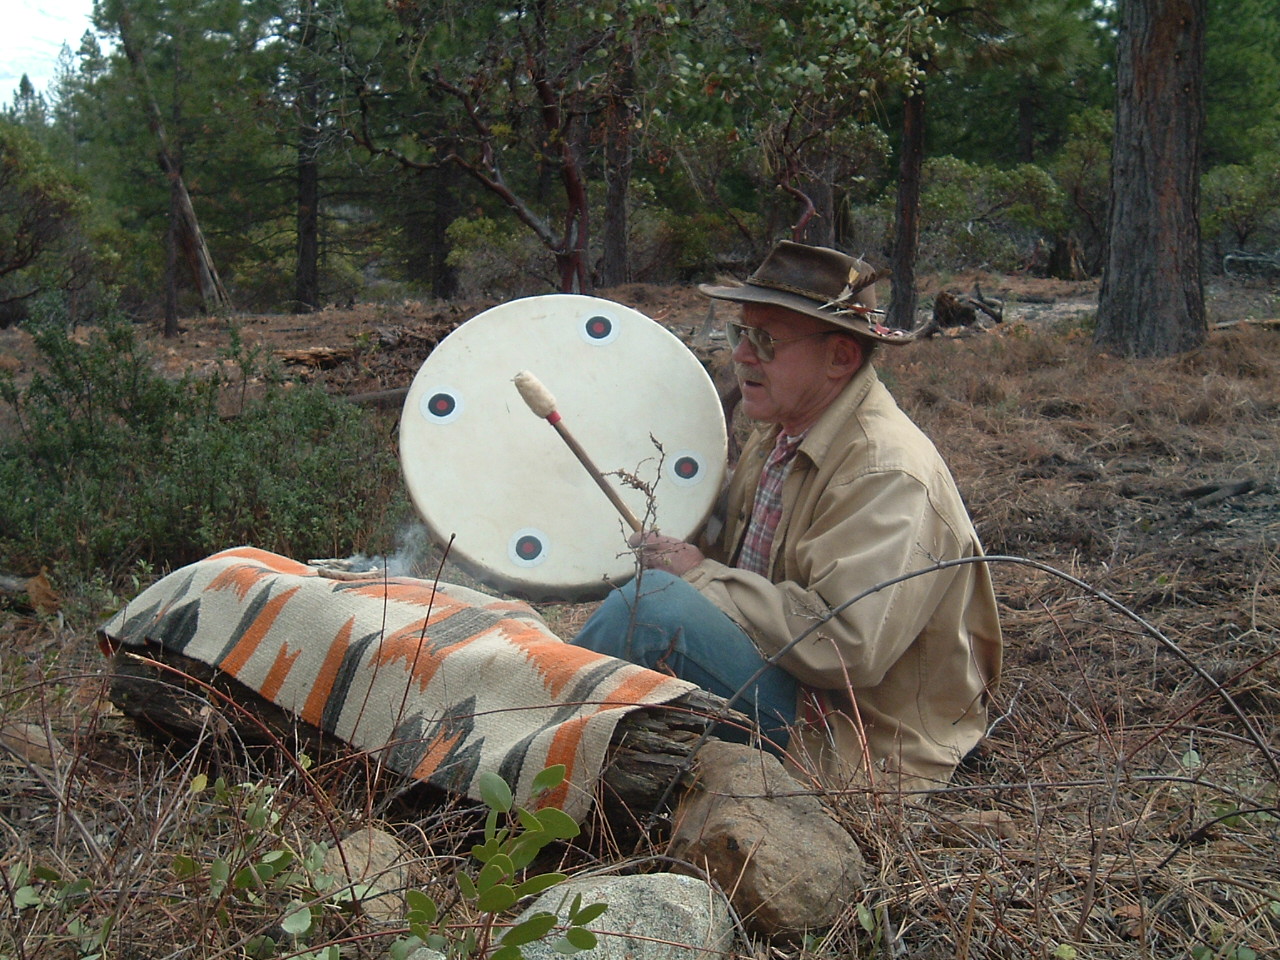 Image of John P Brennan sitting at the edge of a forest drumming.